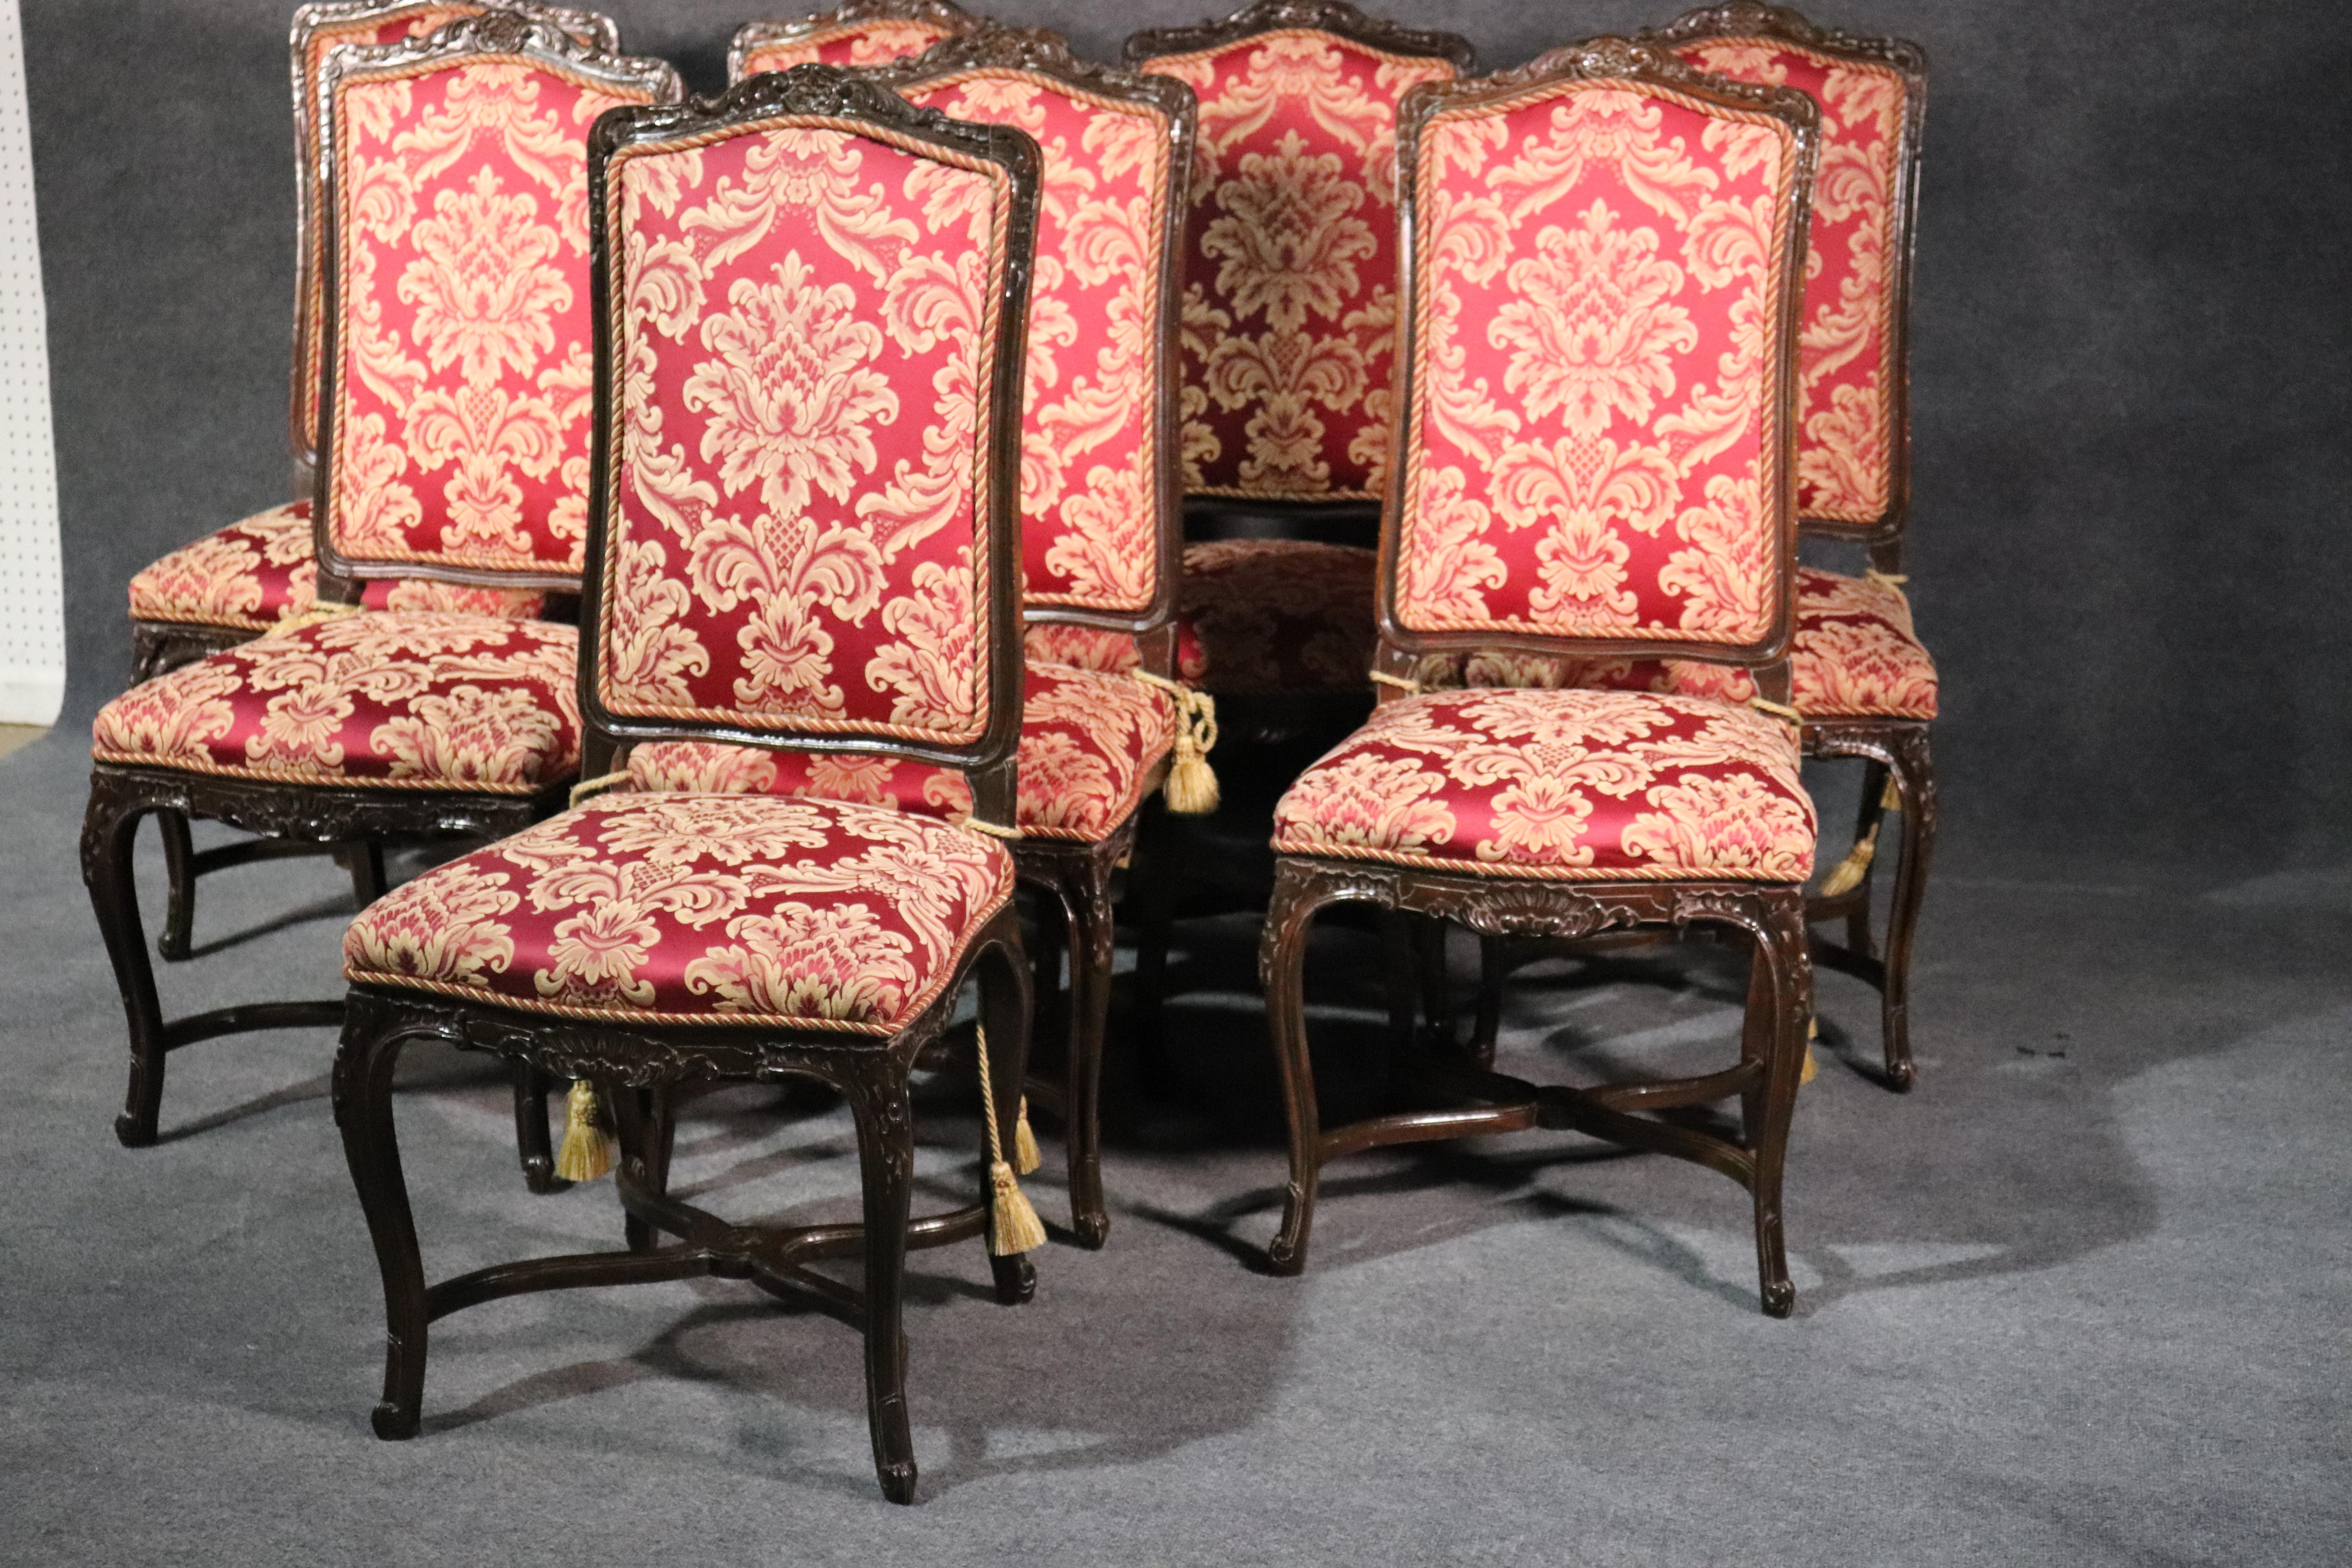 This is a fine set of 8 carved walnut French Louis XV style side chairs. They feature beautiful red damask upholstery and braided welting around the frames. The chairs are in very good condition for their age. They date to the 1950s era. 

Measure